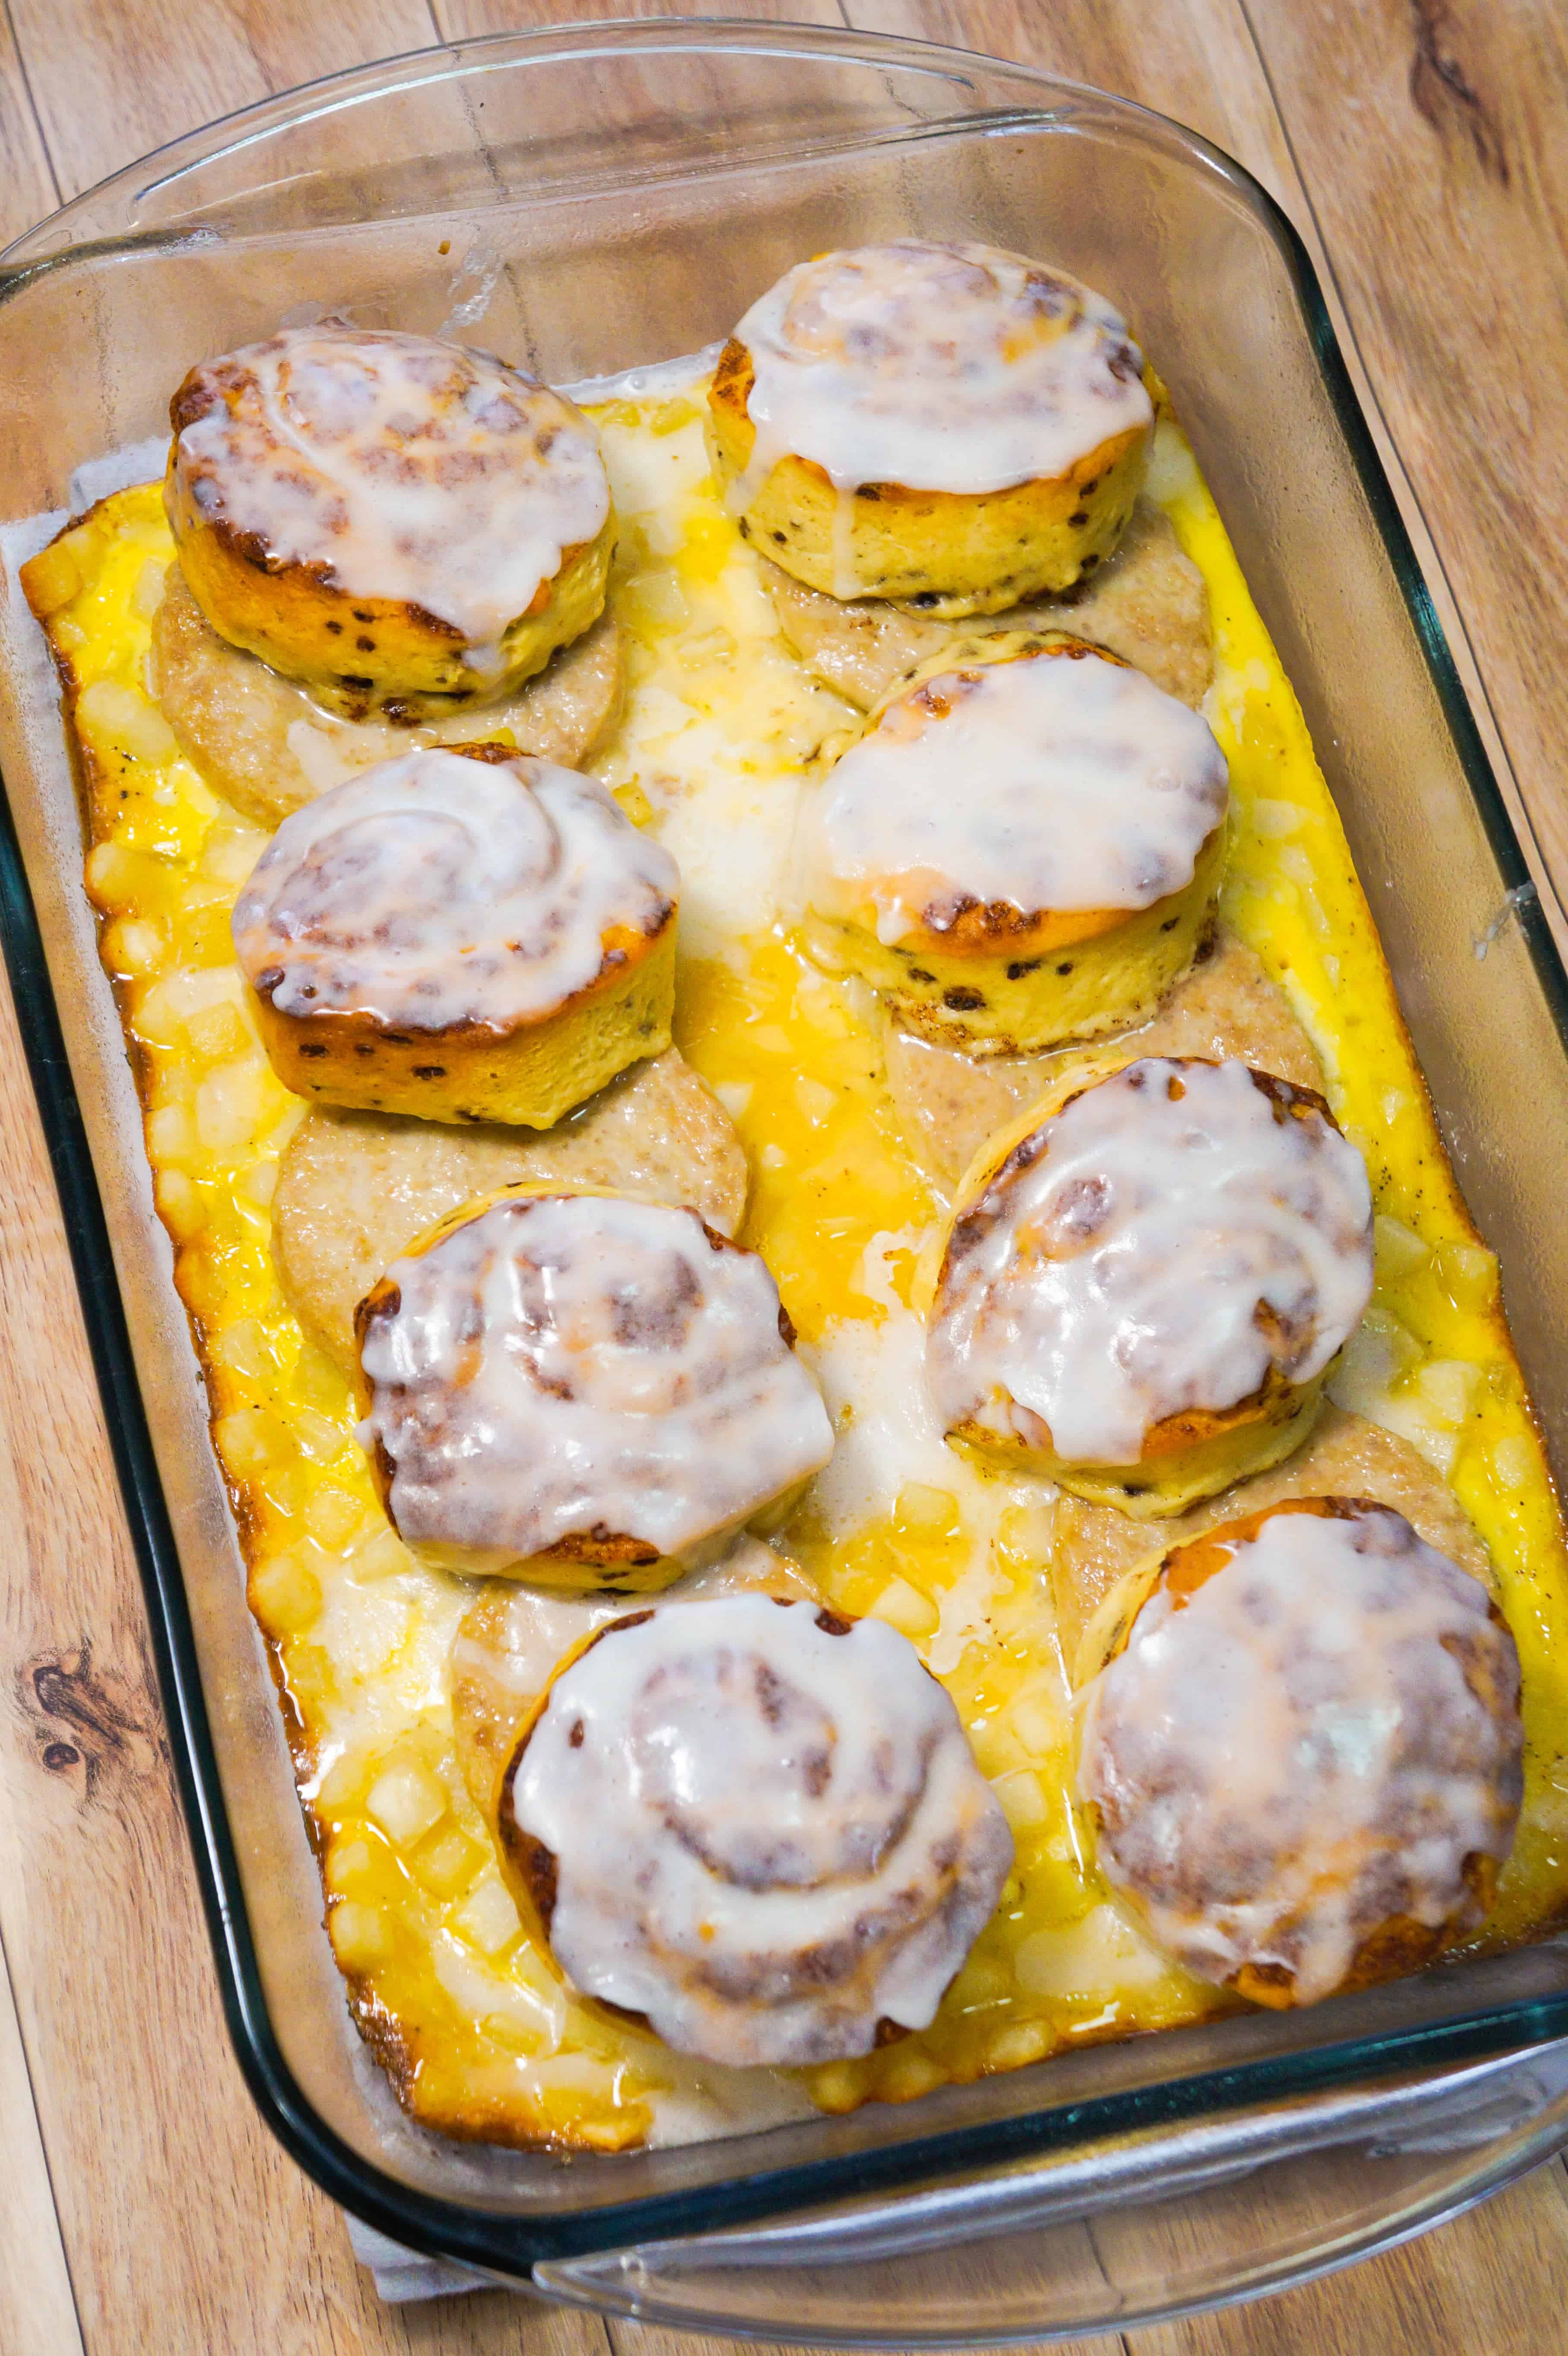 Sausage and egg breakfast casserole topped with Pillsbury cinnamon rolls is and easy breakfast recipe.